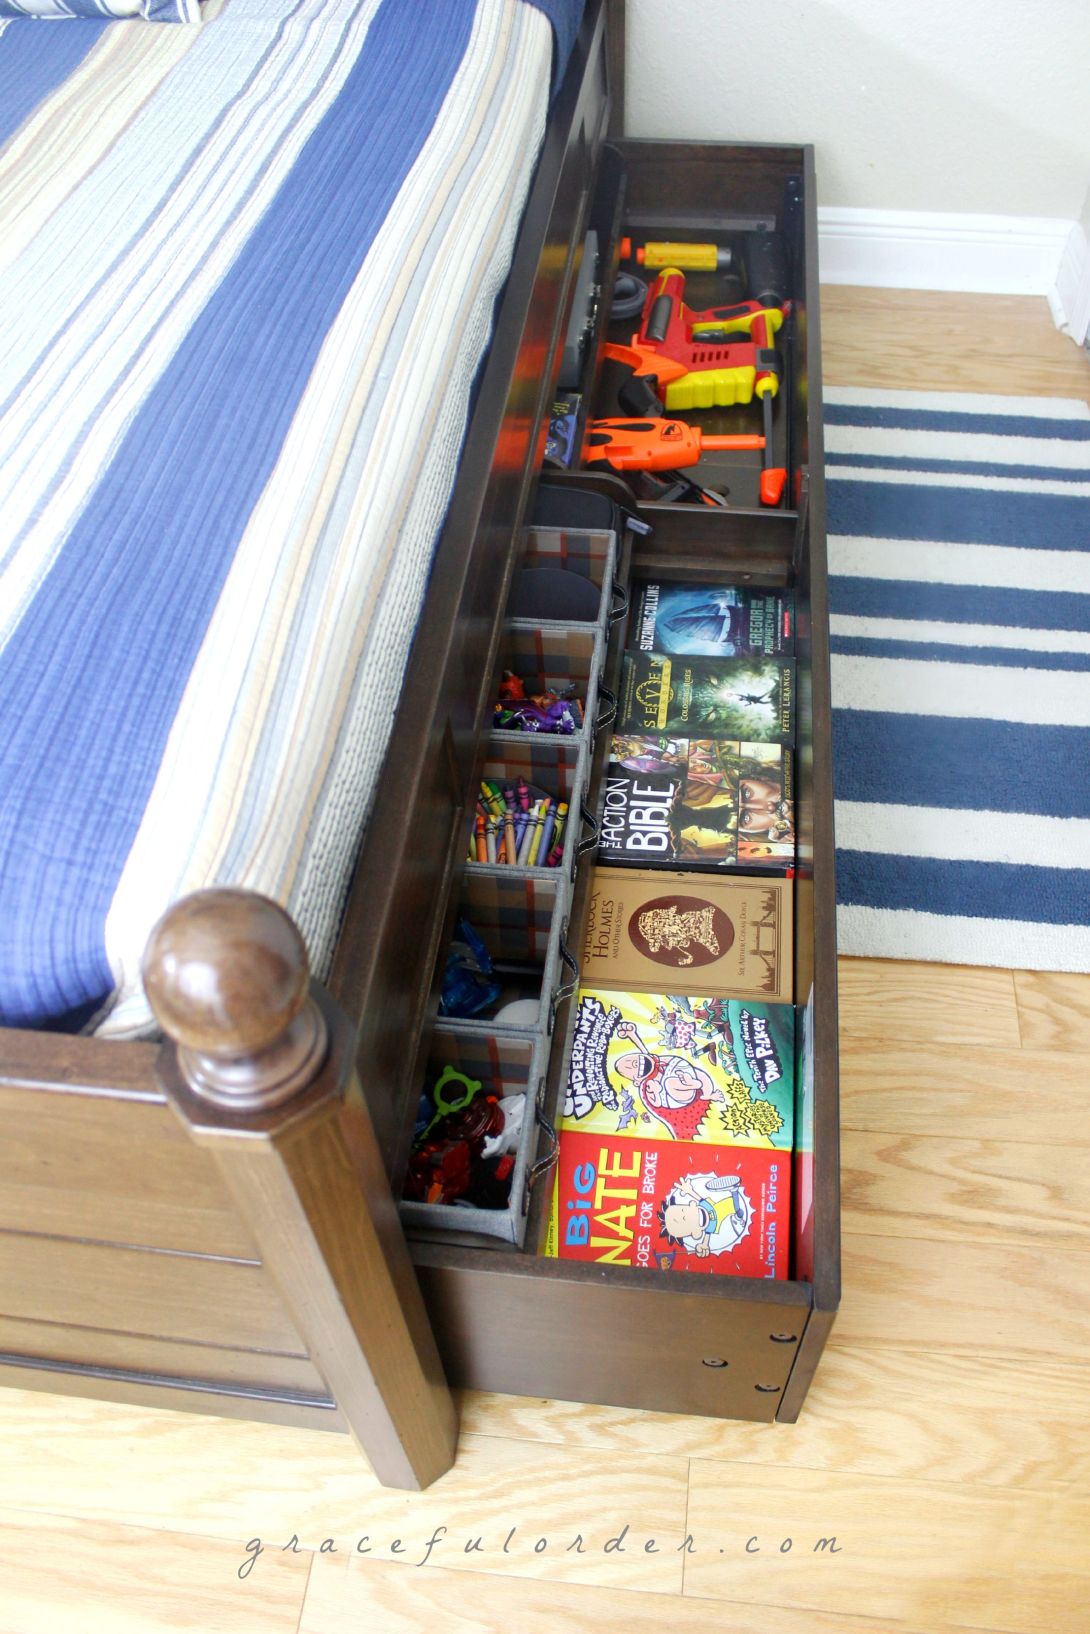 Drawers in the bed with items for storage.